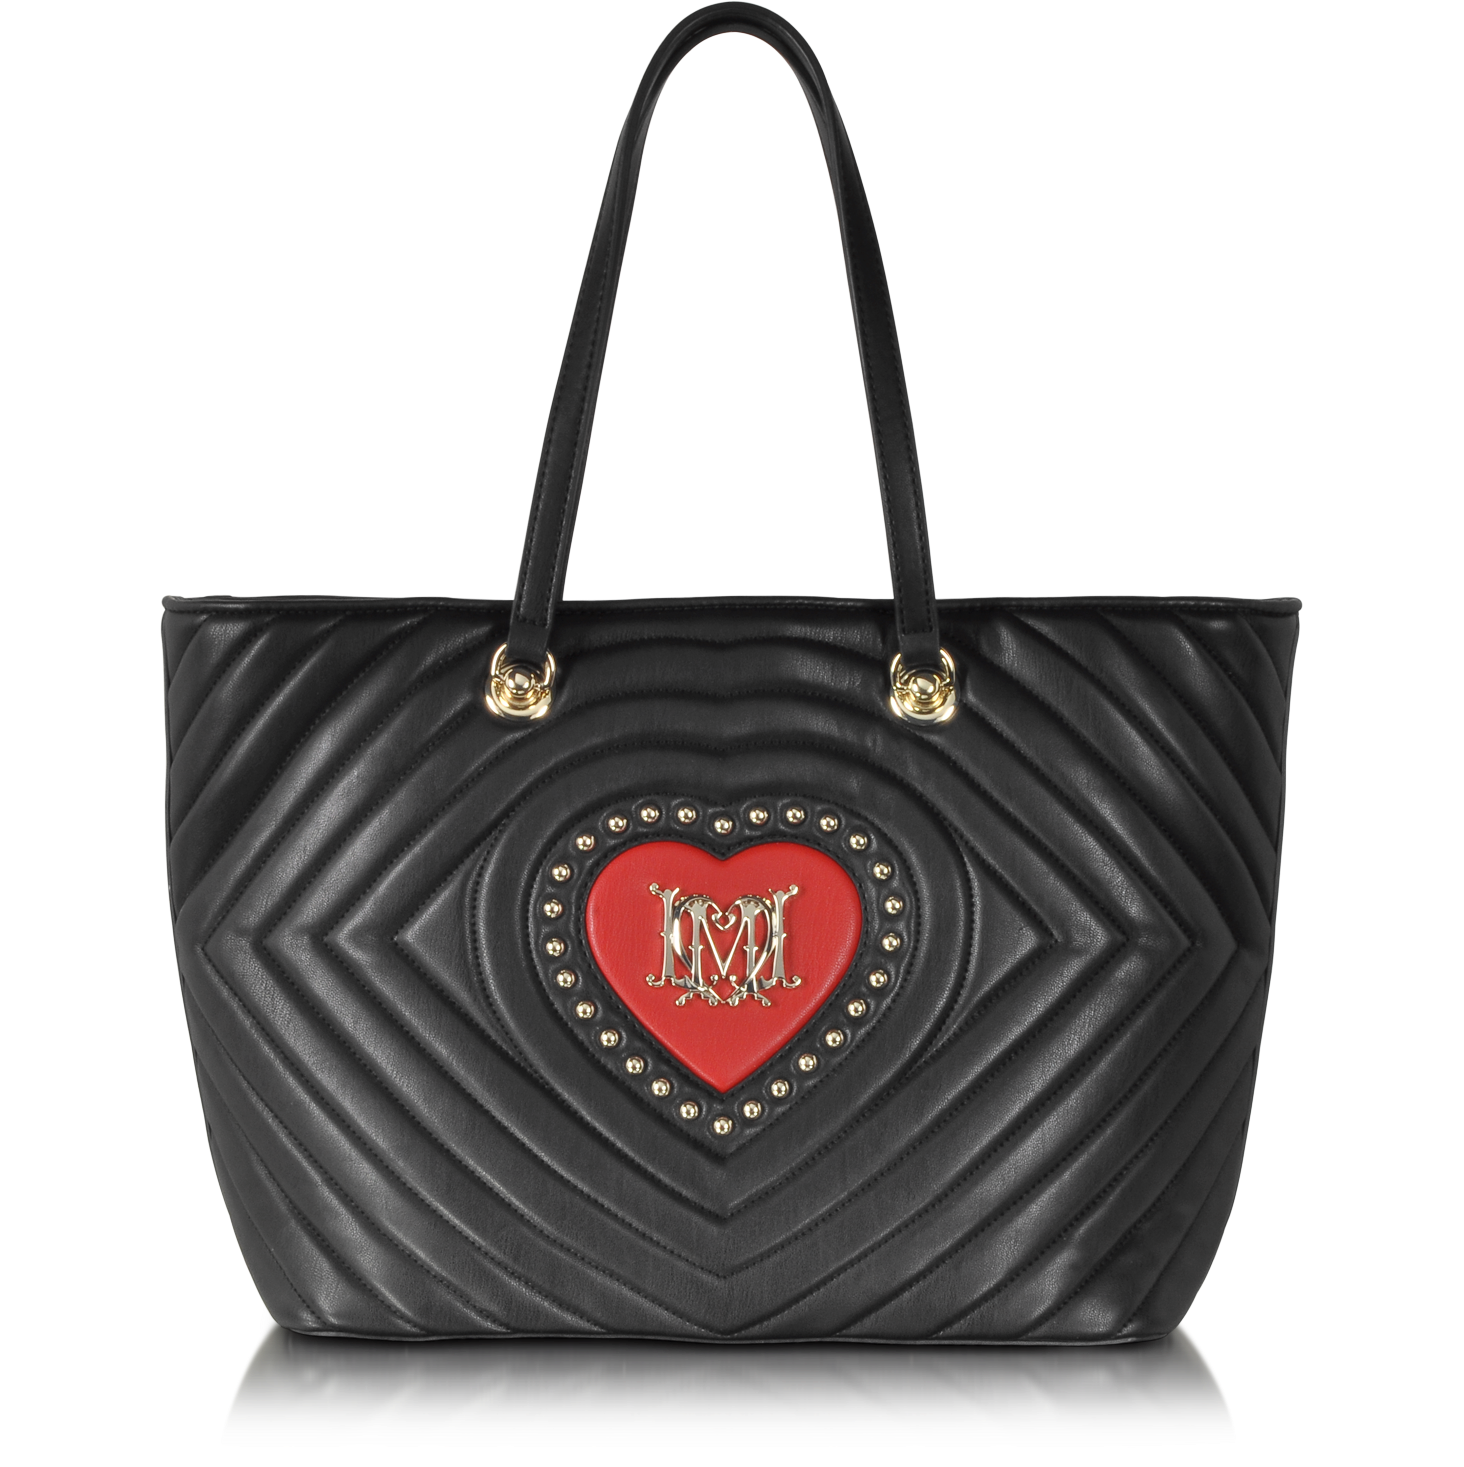 moschino black bag with red heart